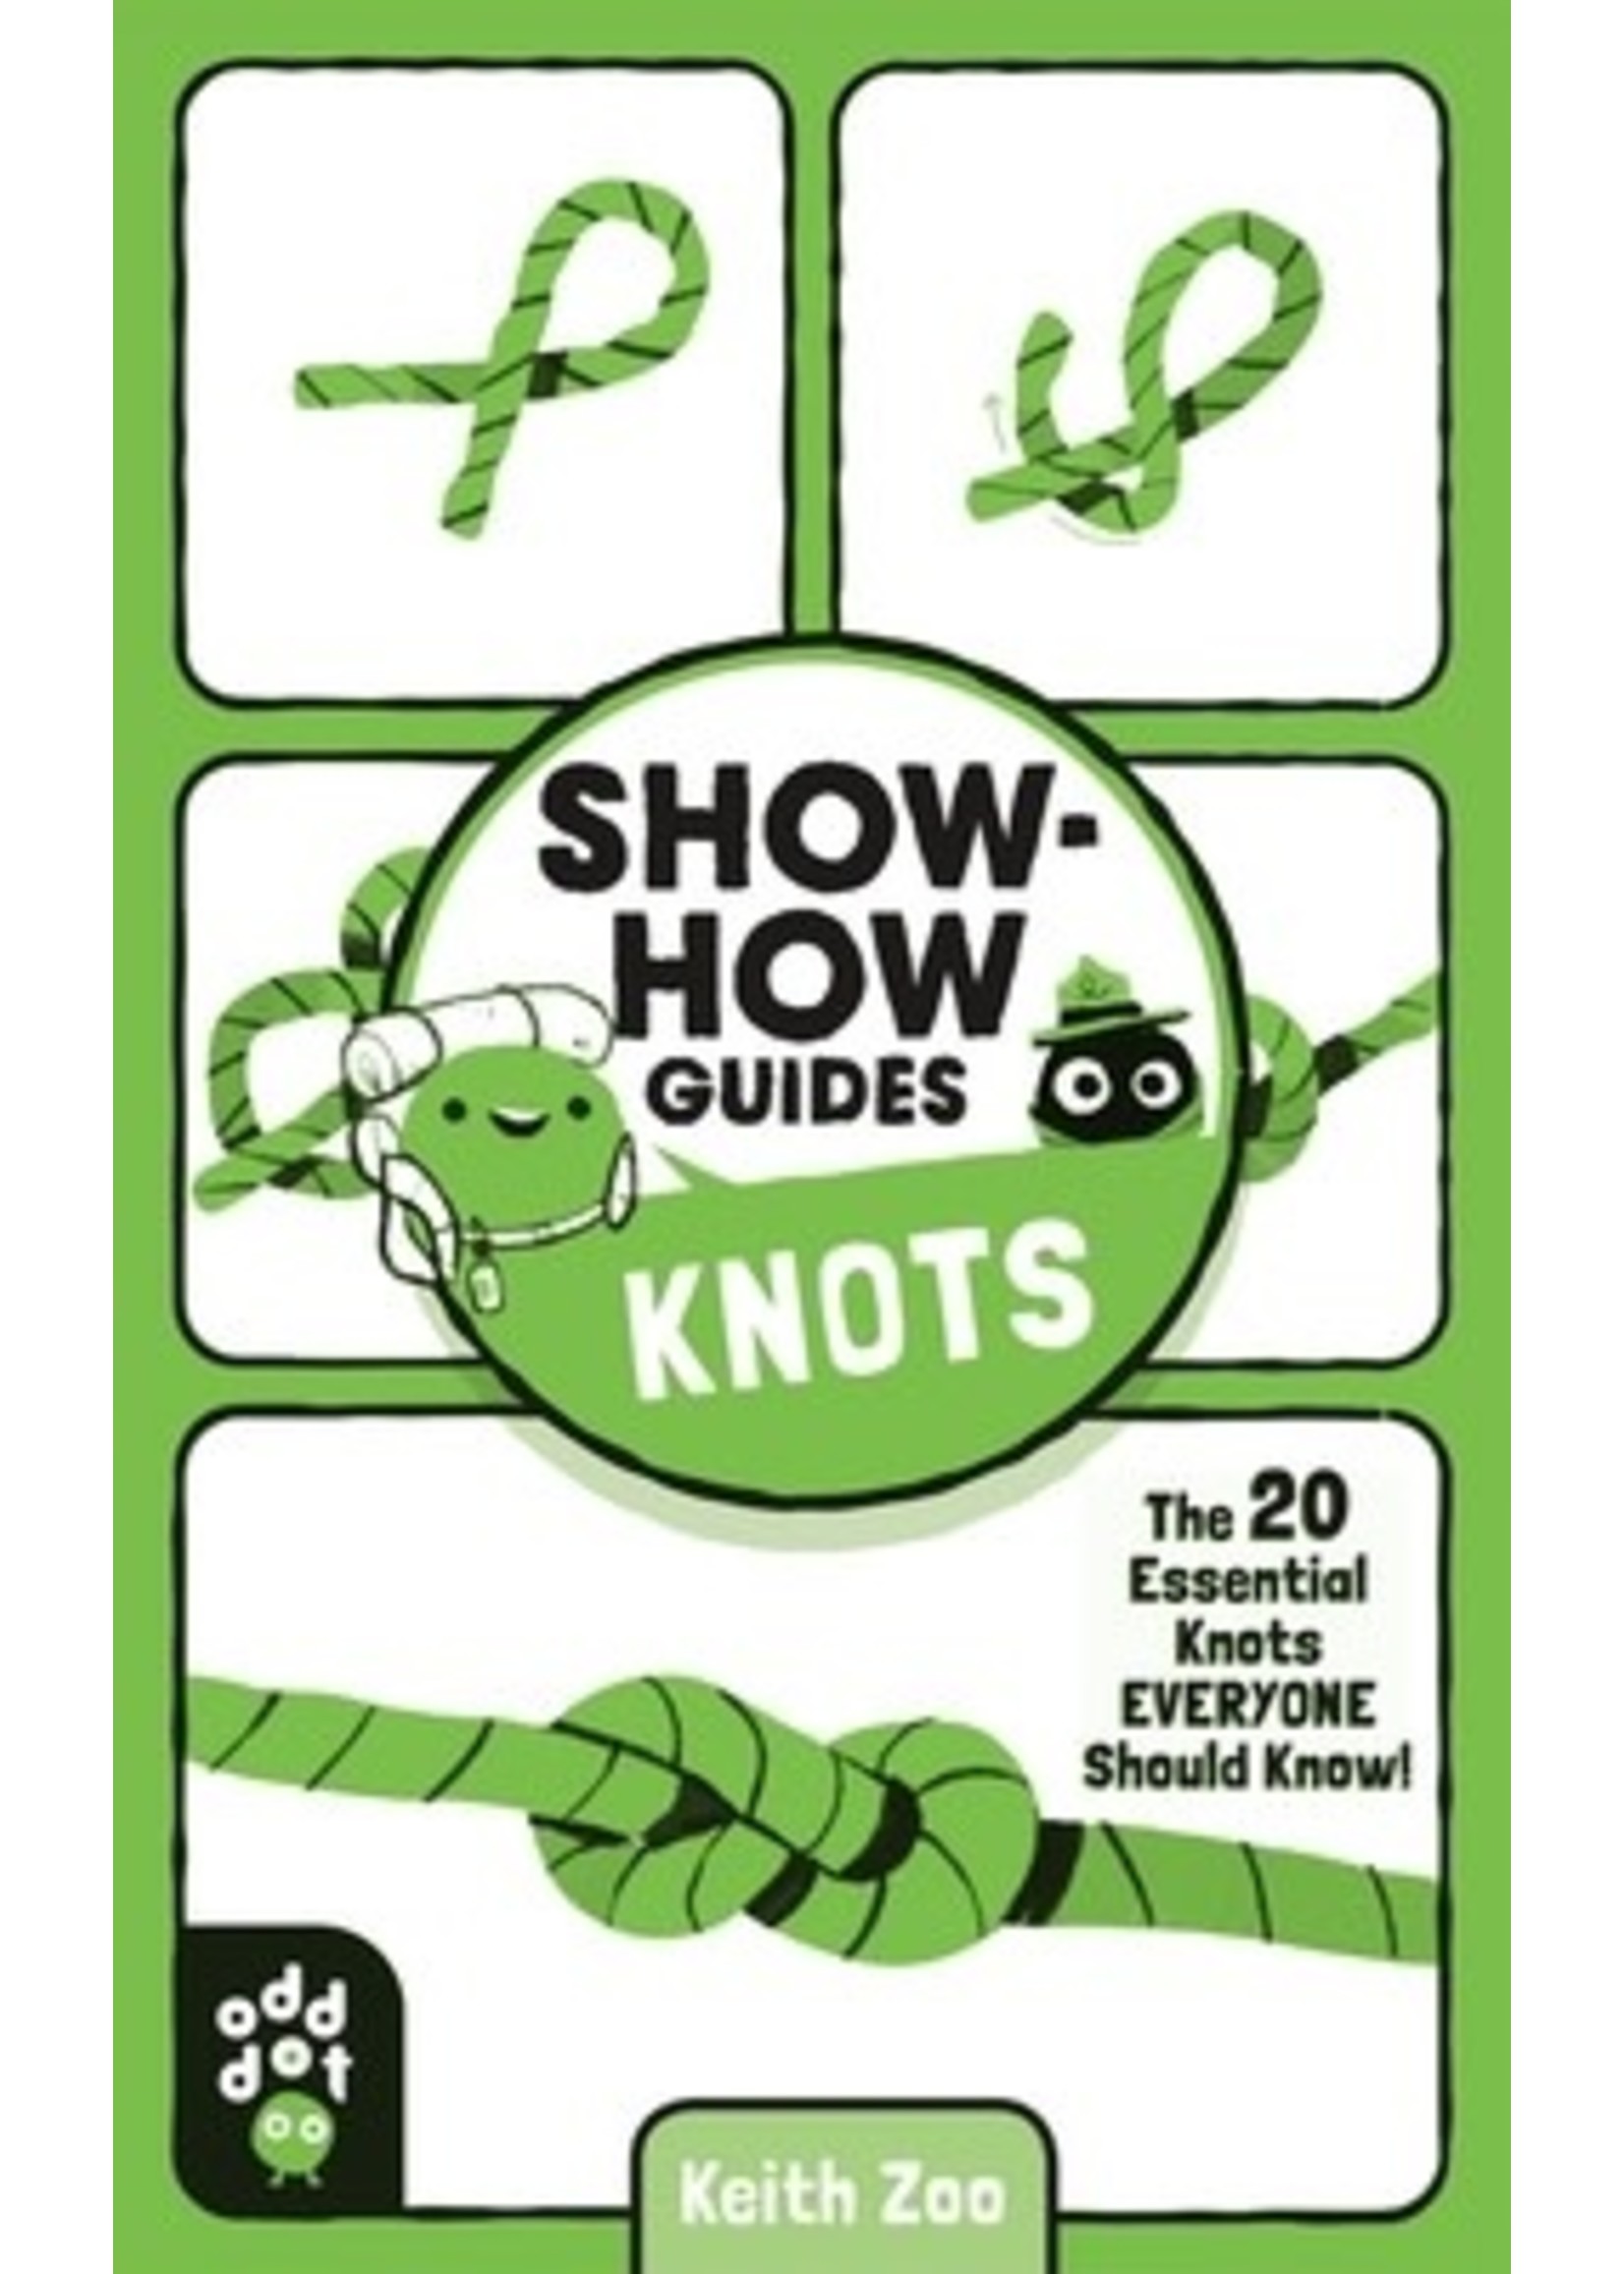 Show-How Guides: Knots: The 20 Essential Knots Everyone Should Know! by Keith Zoo